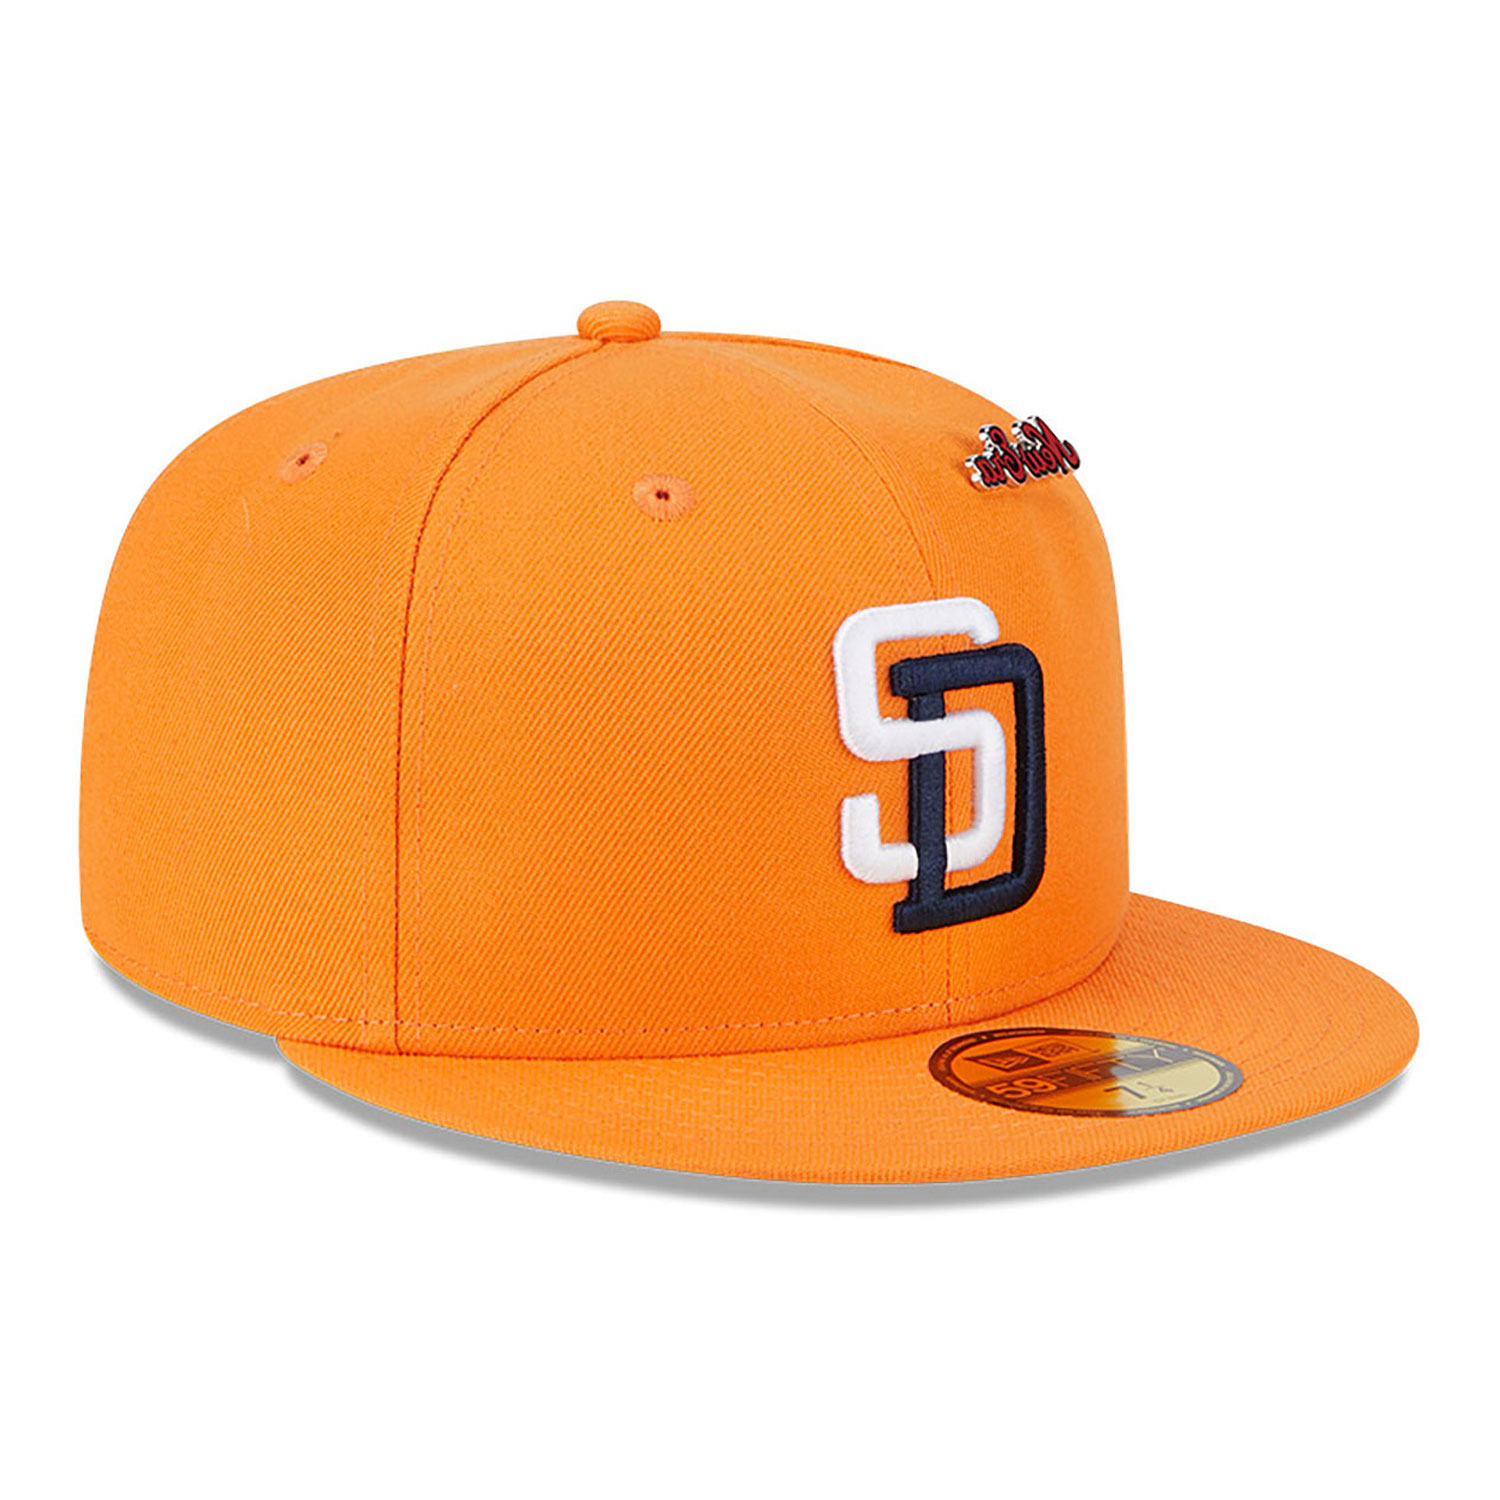 San Diego Padres MLB Cooperstown Orange 59FIFTY Fitted Cap